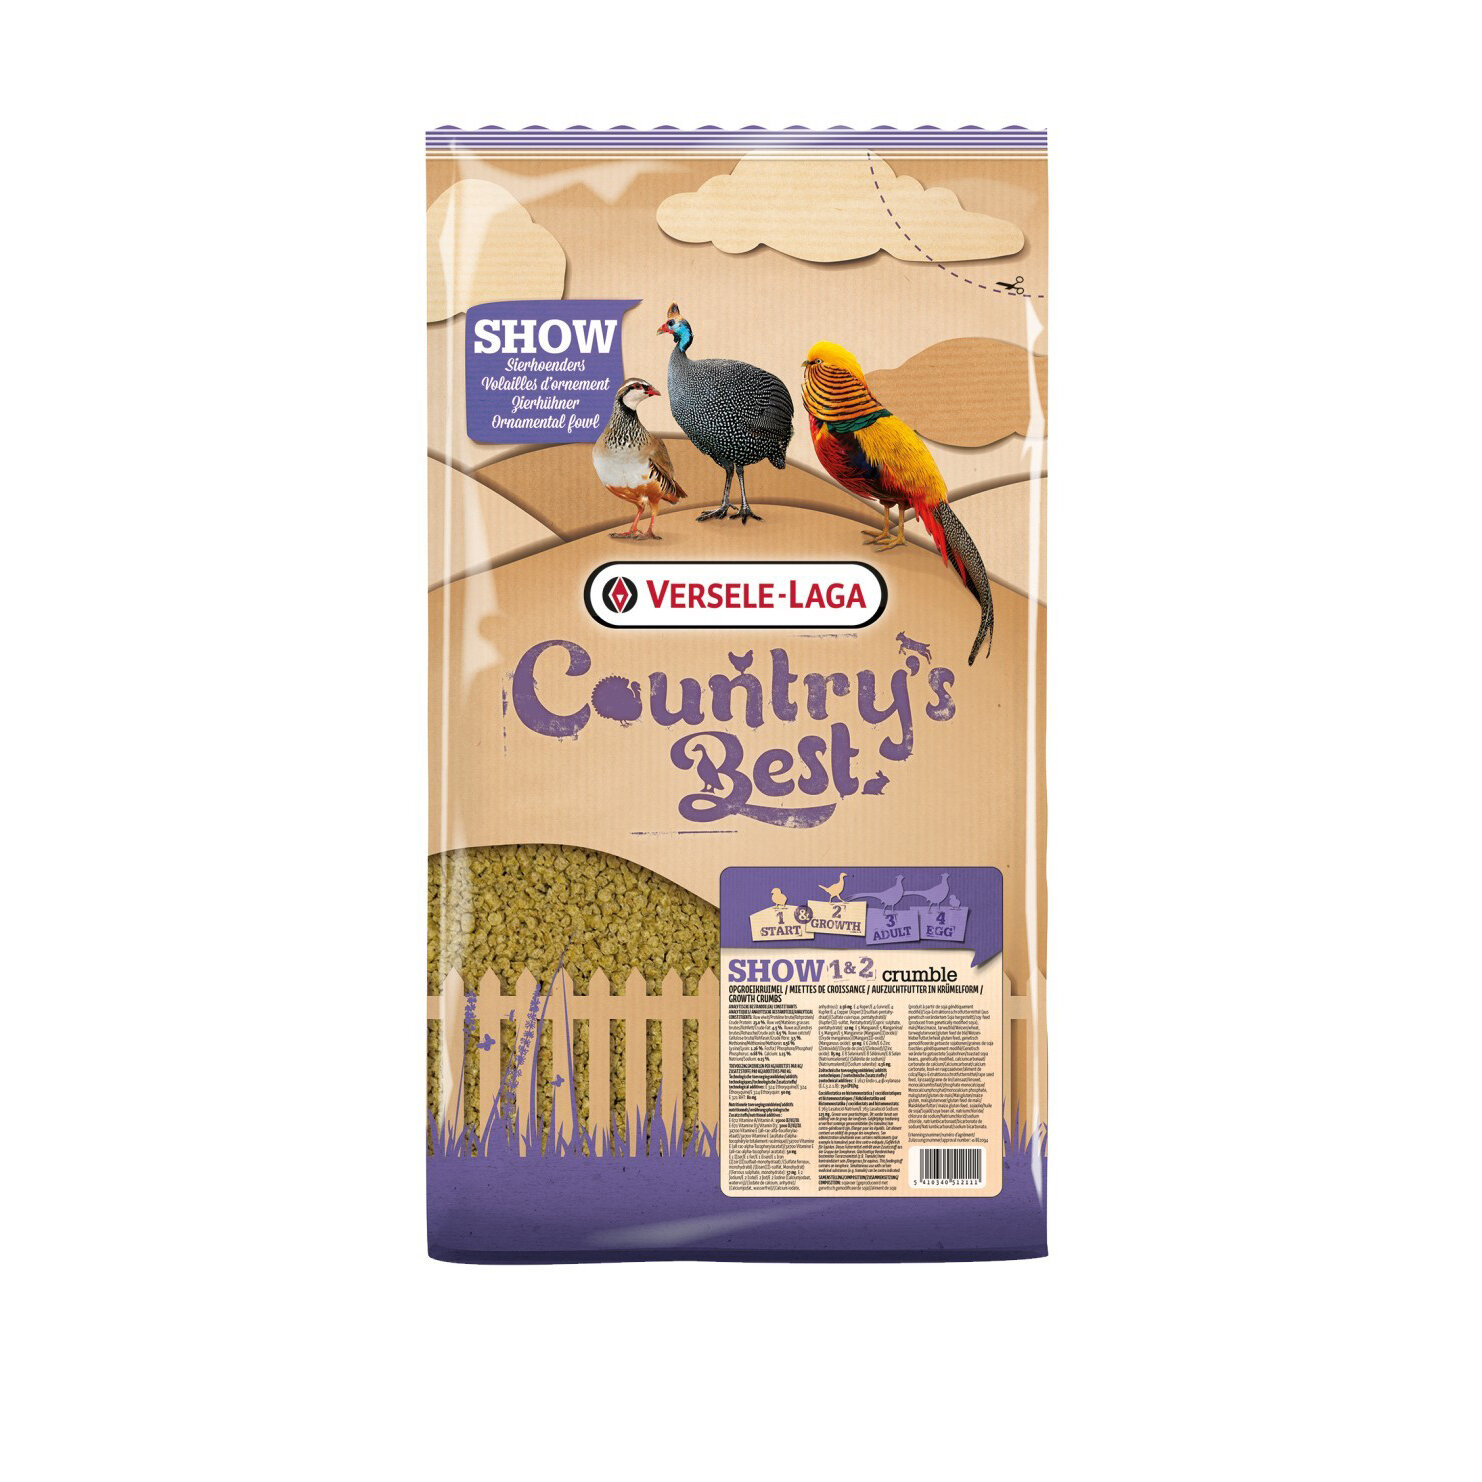 Versele Laga Countrys Best Show 1 & 2 Pheasant Crumble Feed 5kg